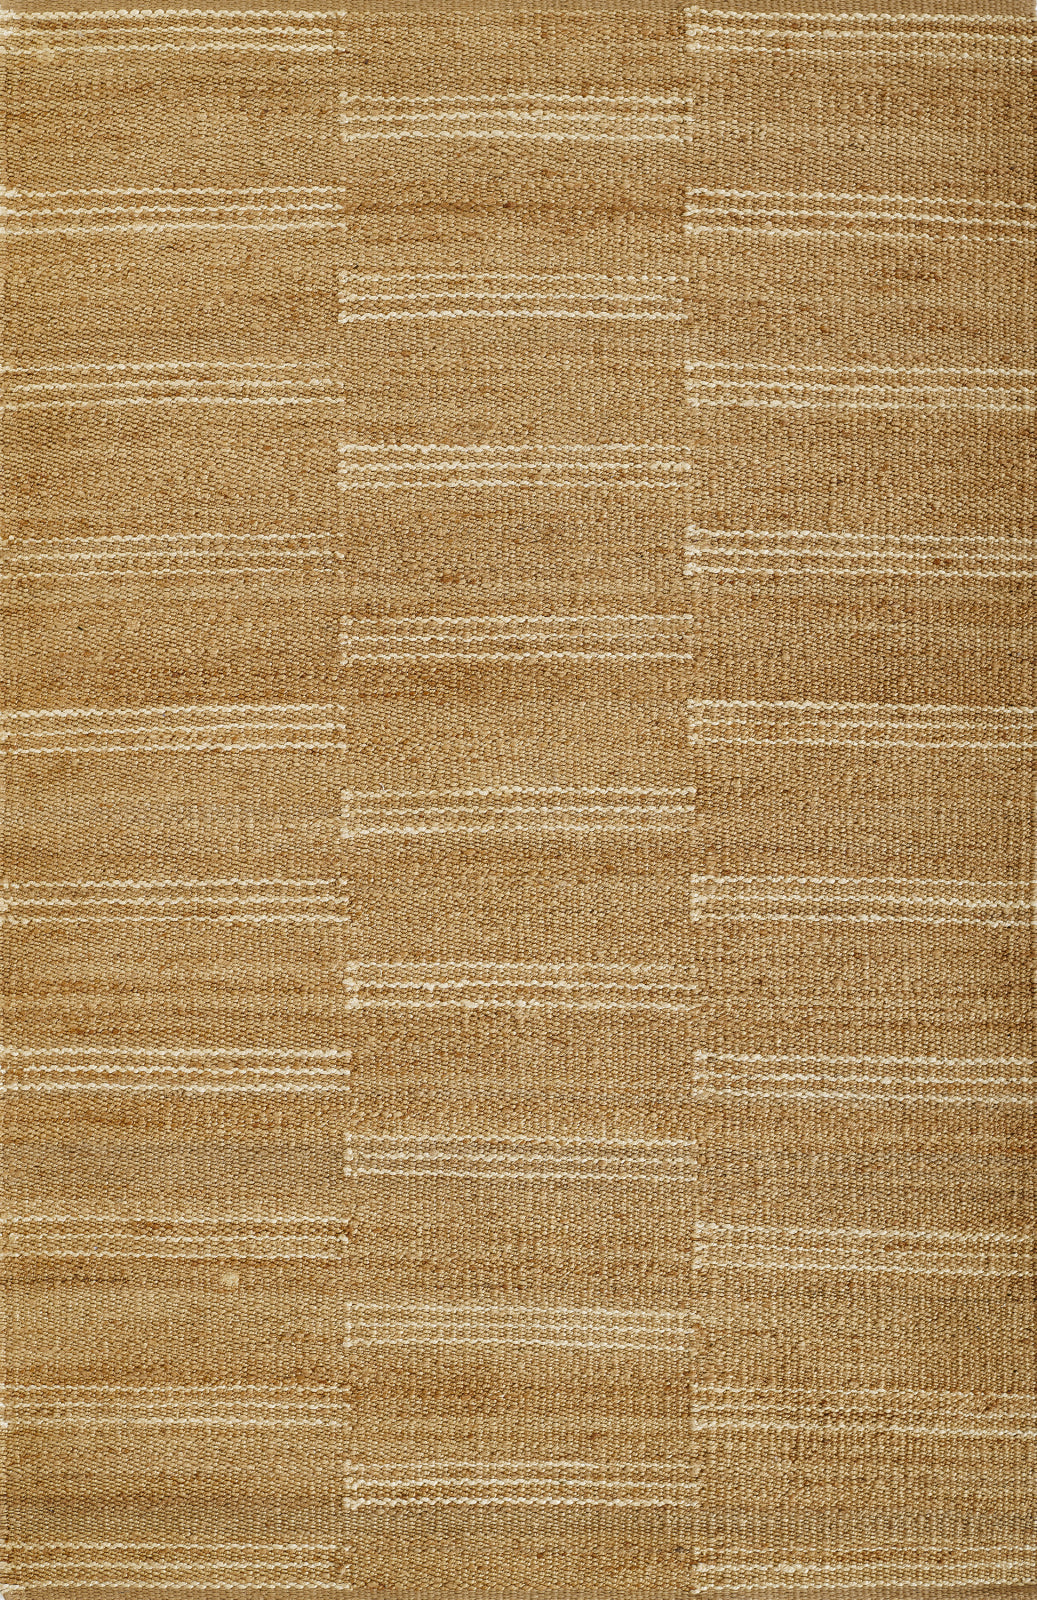 Momeni Crescent CRE-1 Natural Area Rug by Erin Gates main image